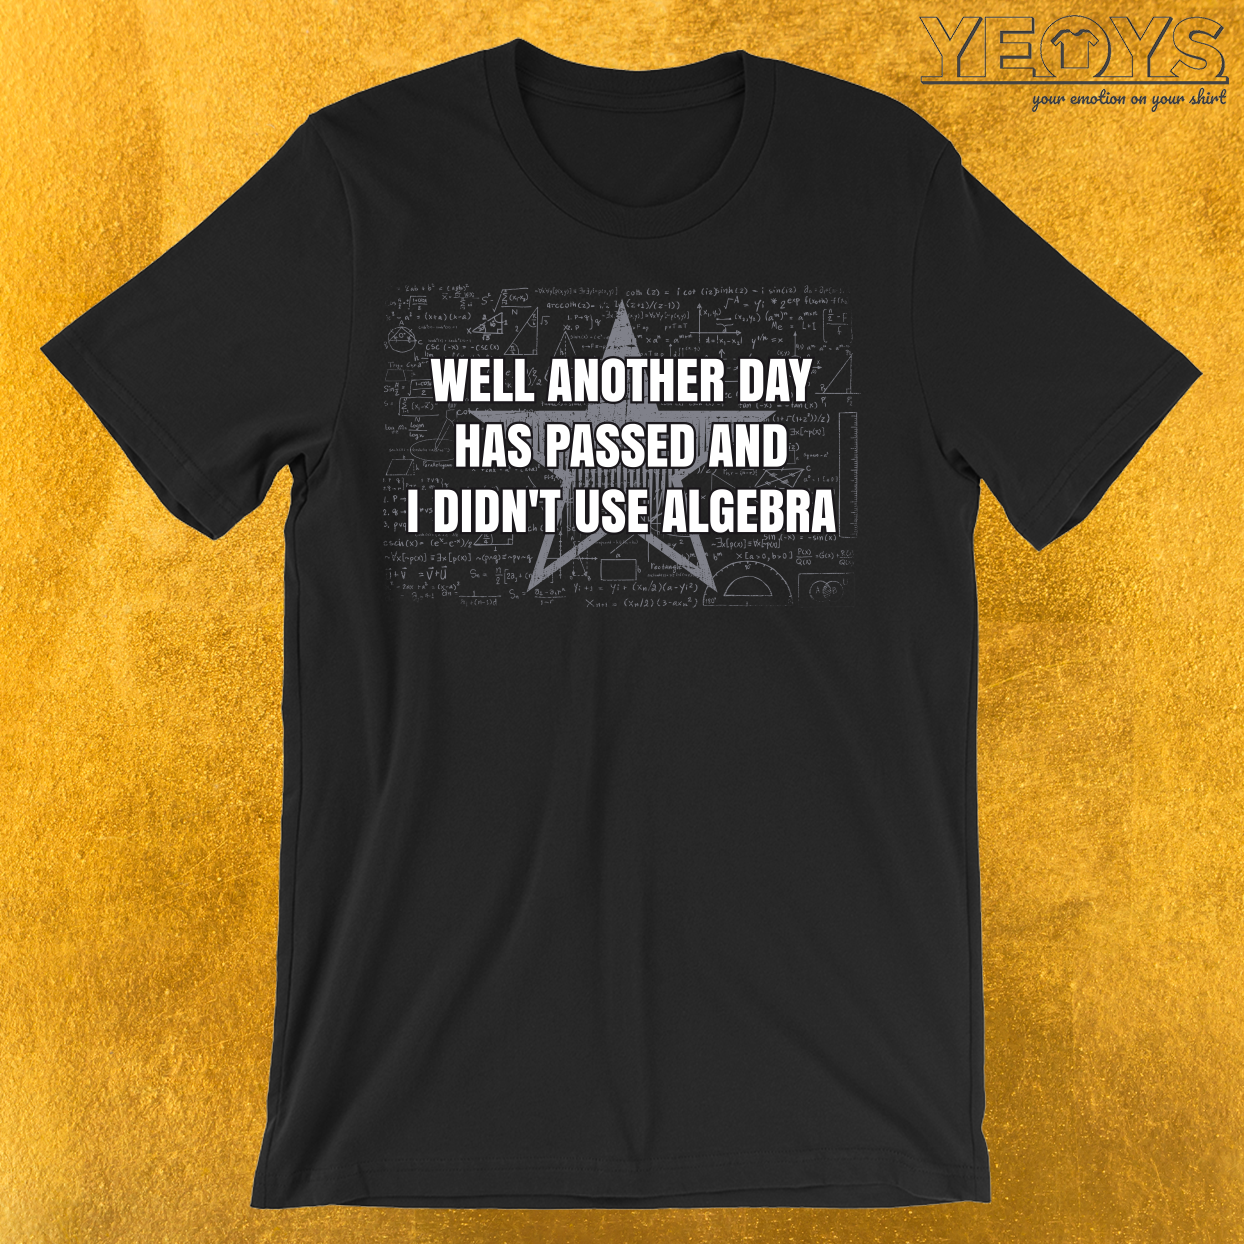 Another Day Has Passed Algebra T-Shirt